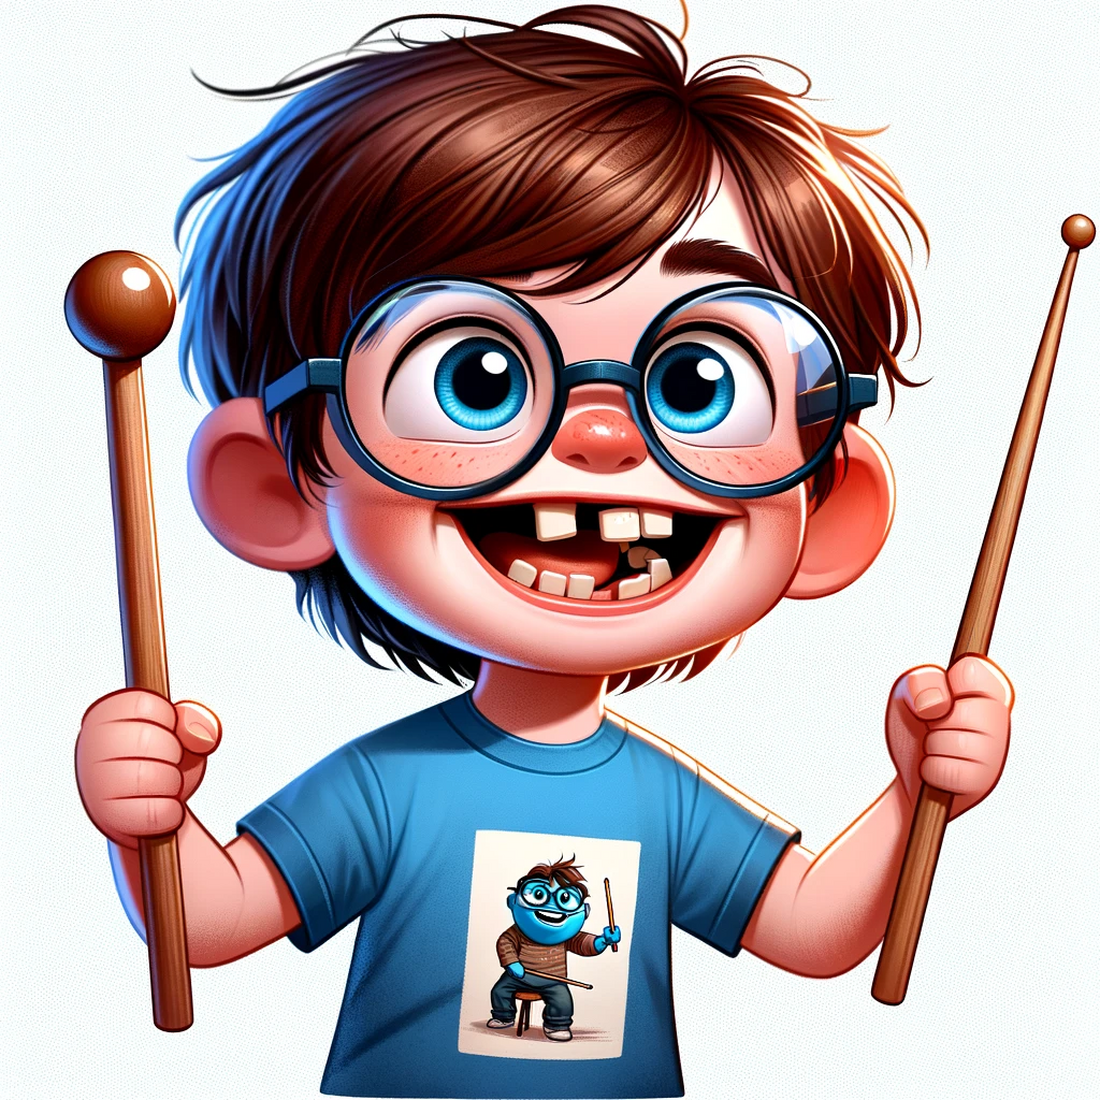 AI art of a young boy holding drum sticks, in a cartoon style